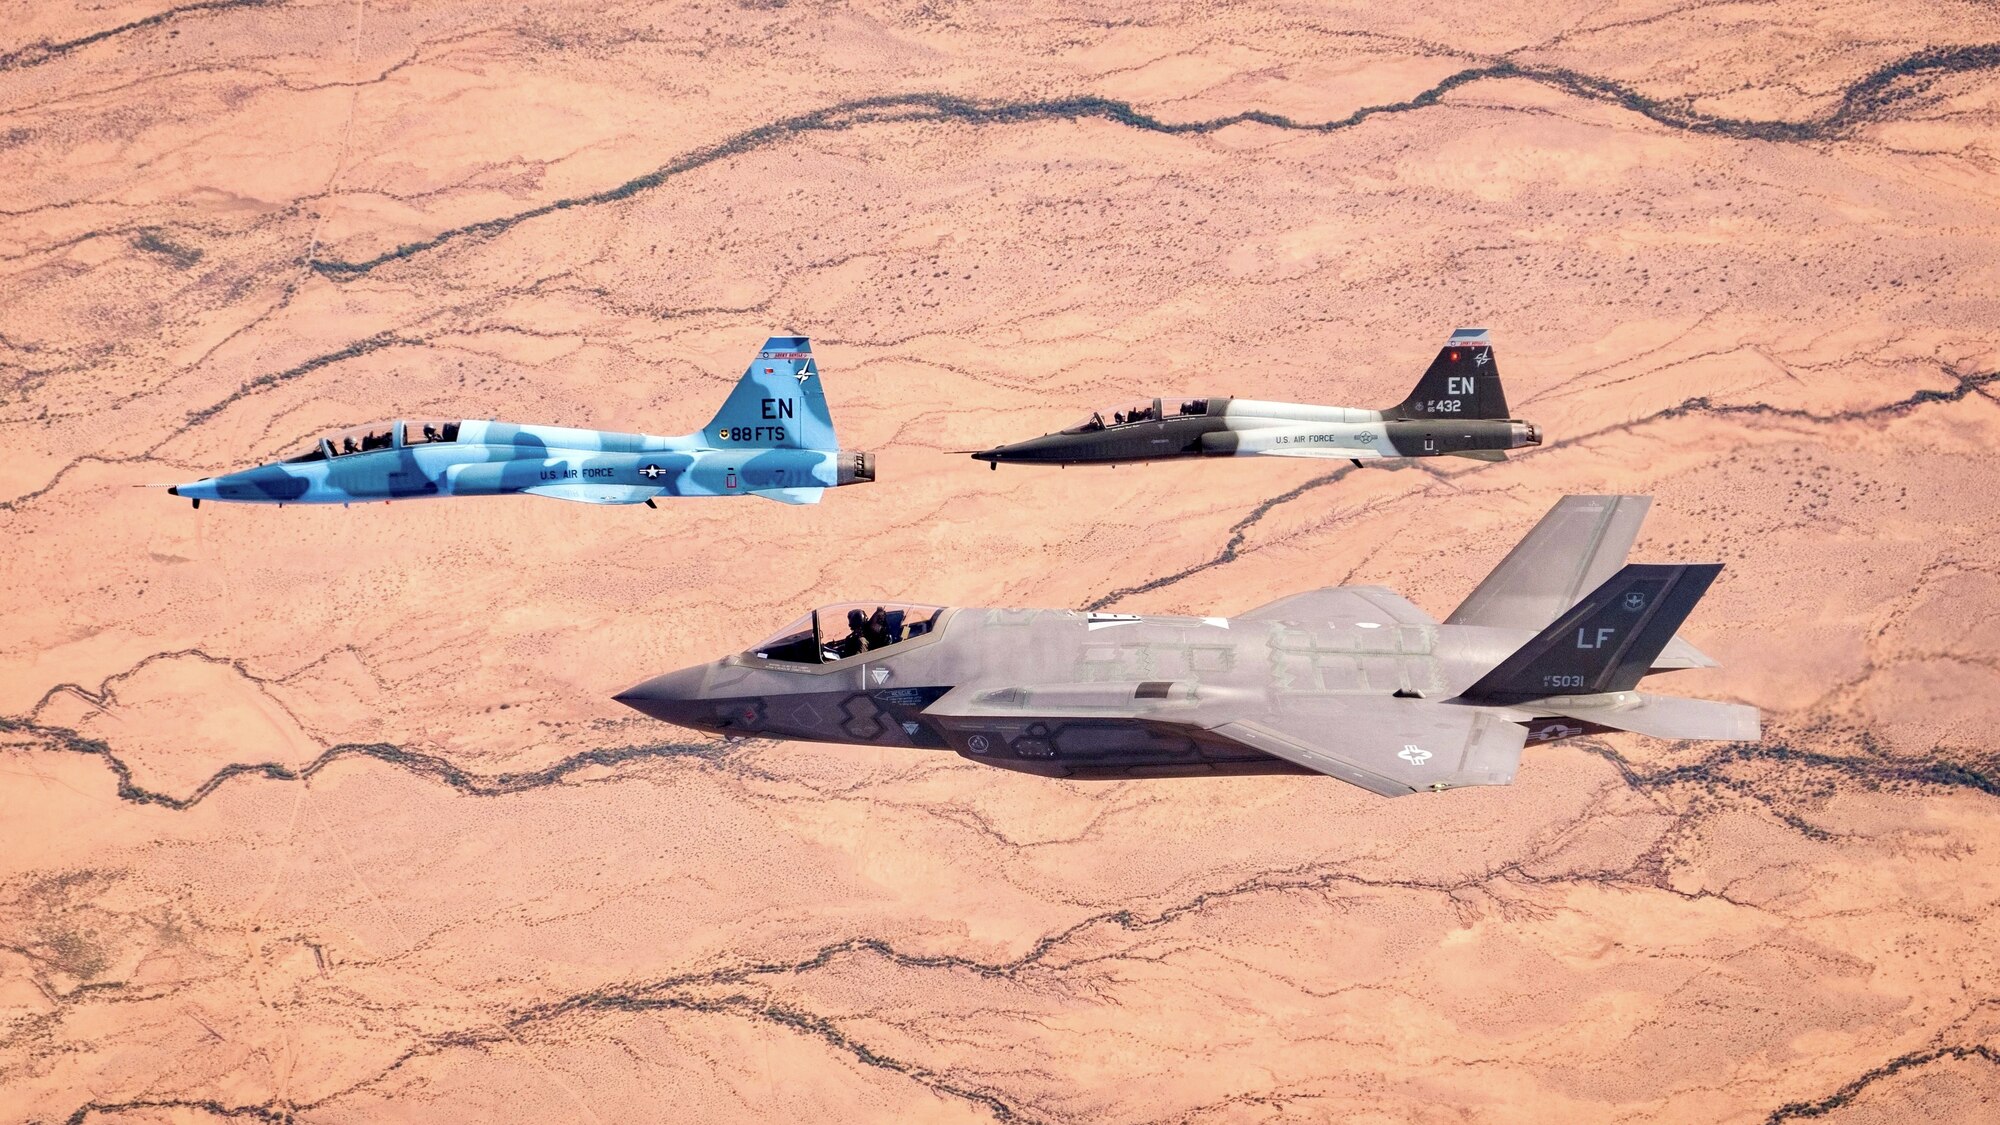 88th FTS plays aggressor role in Arizona